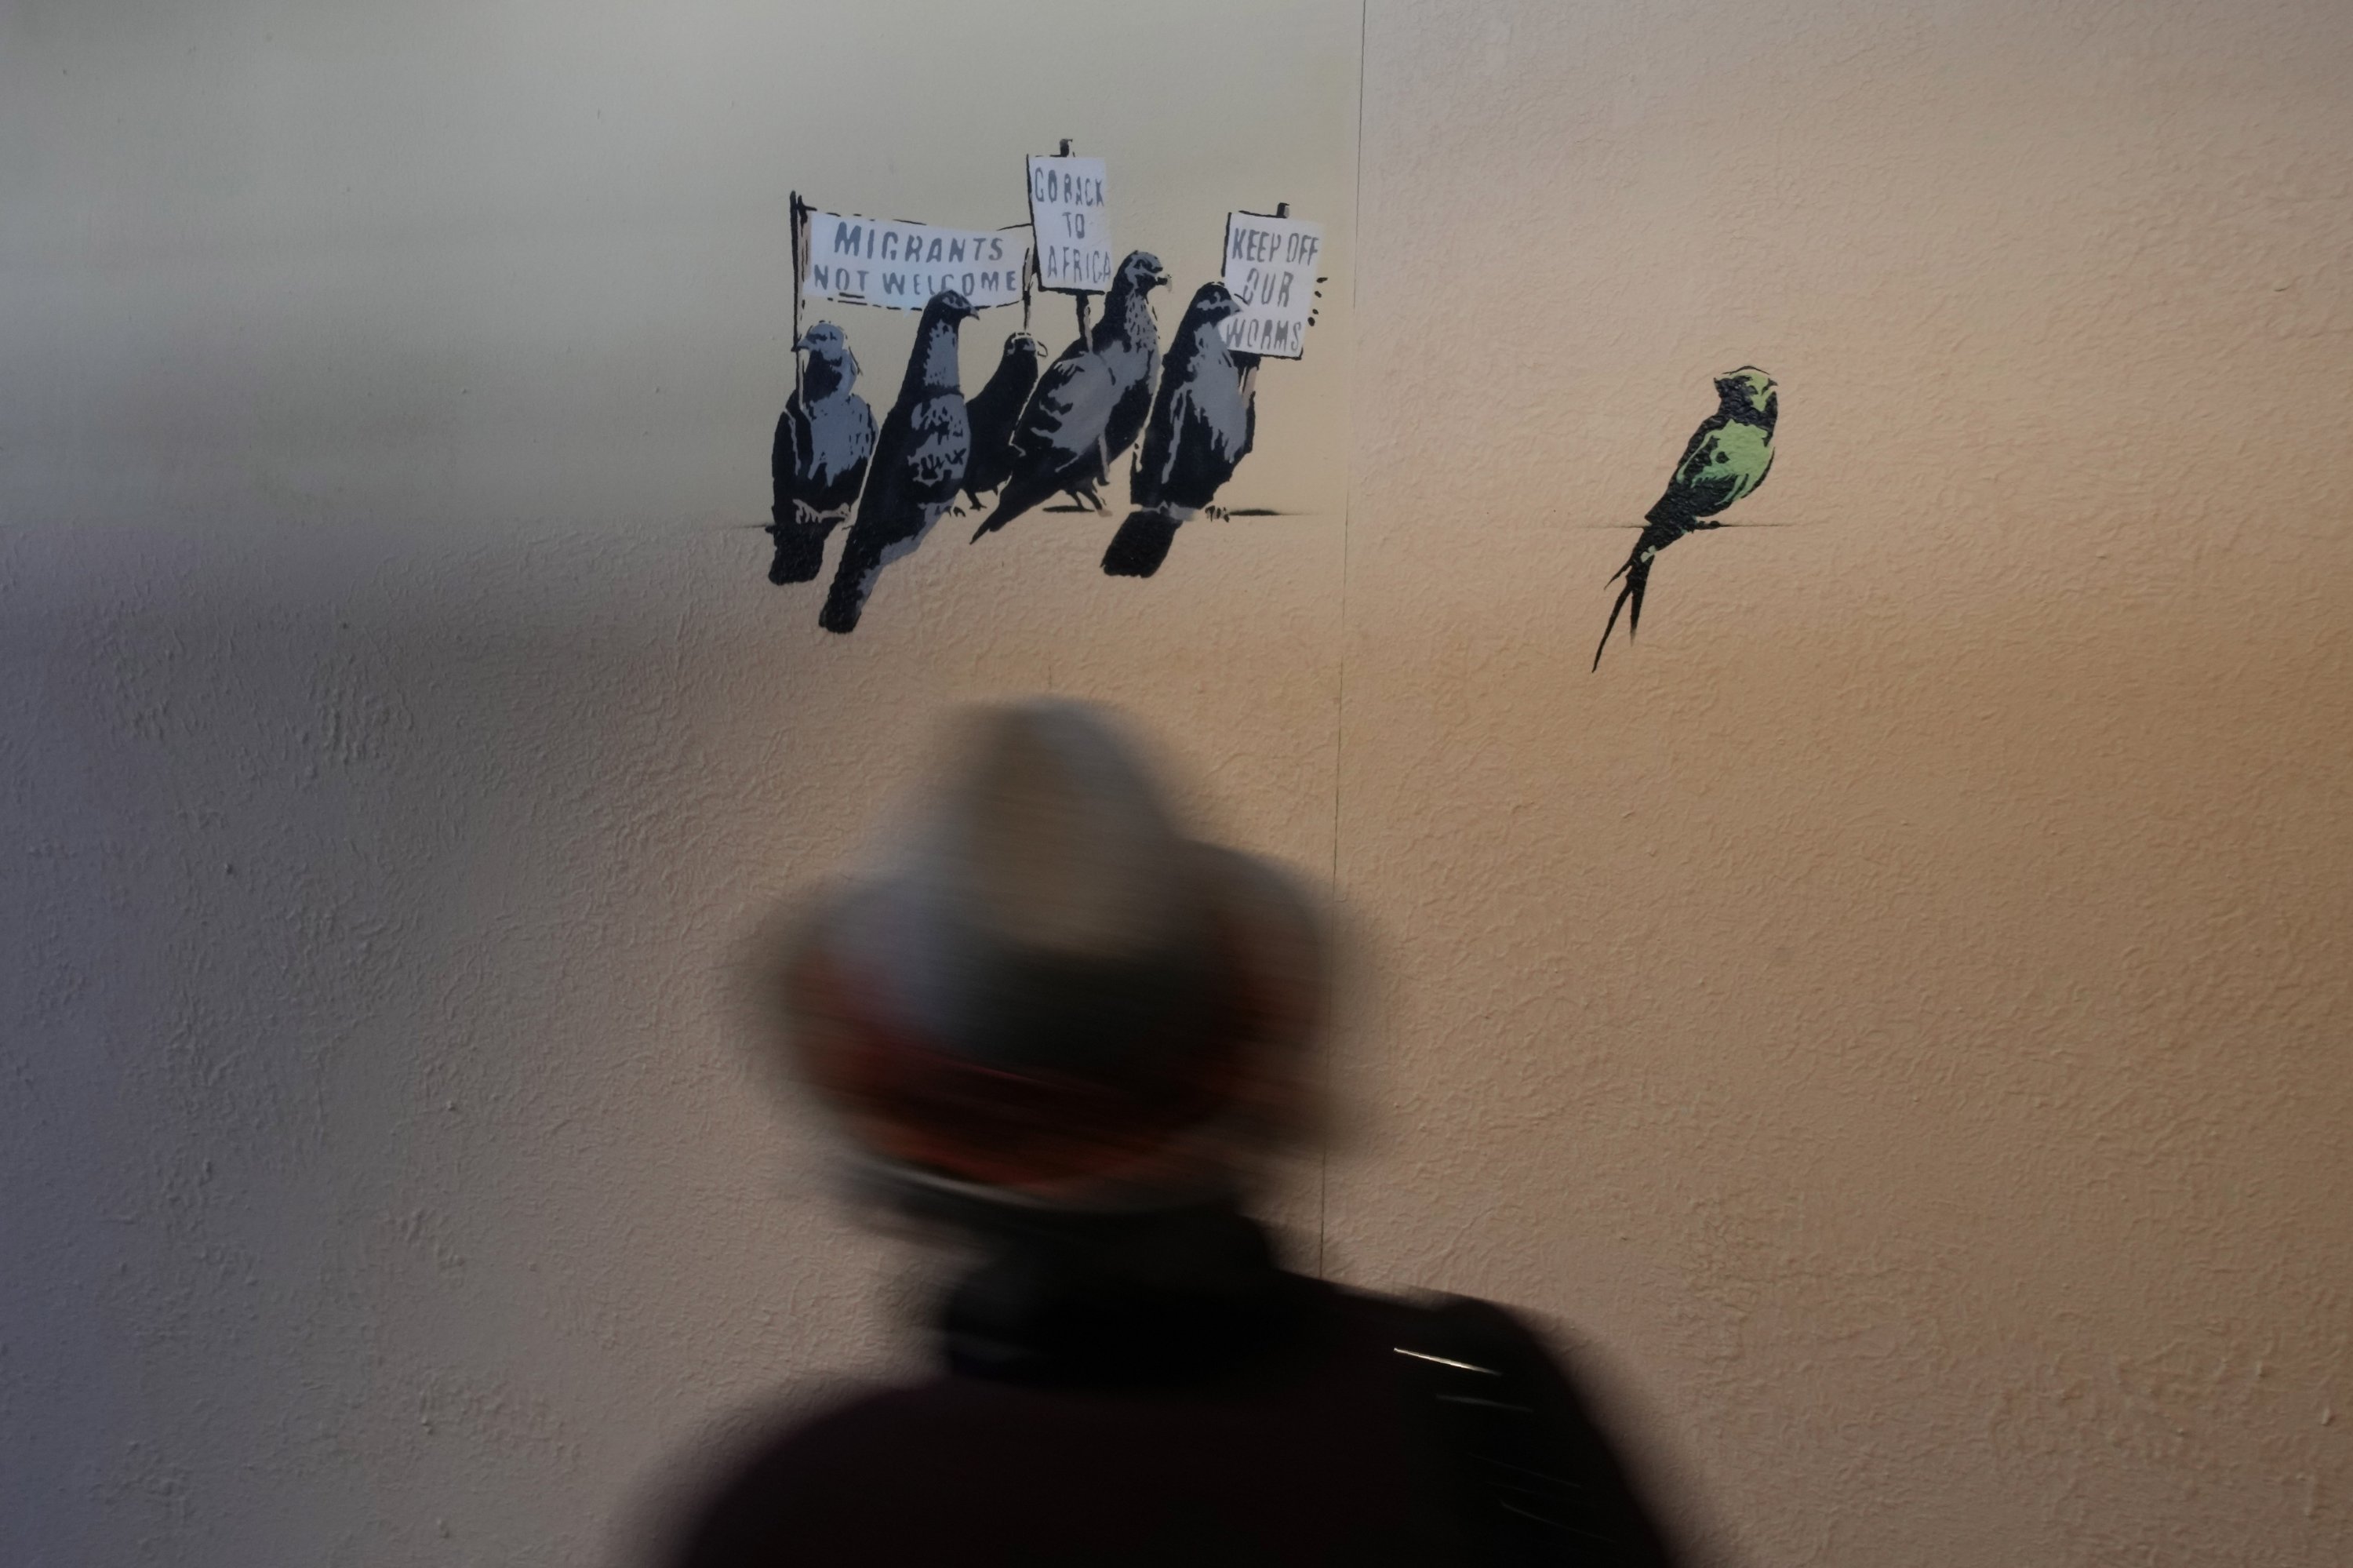 A visitor walks past "Pigeons", a reproduction of a mural by British artist Banksy, during the unveiling of the "The World of Banksy, The Immersive Experience" exhibition, in Milan, Italy, Thursday, Dec. 2, 2021. (AP)